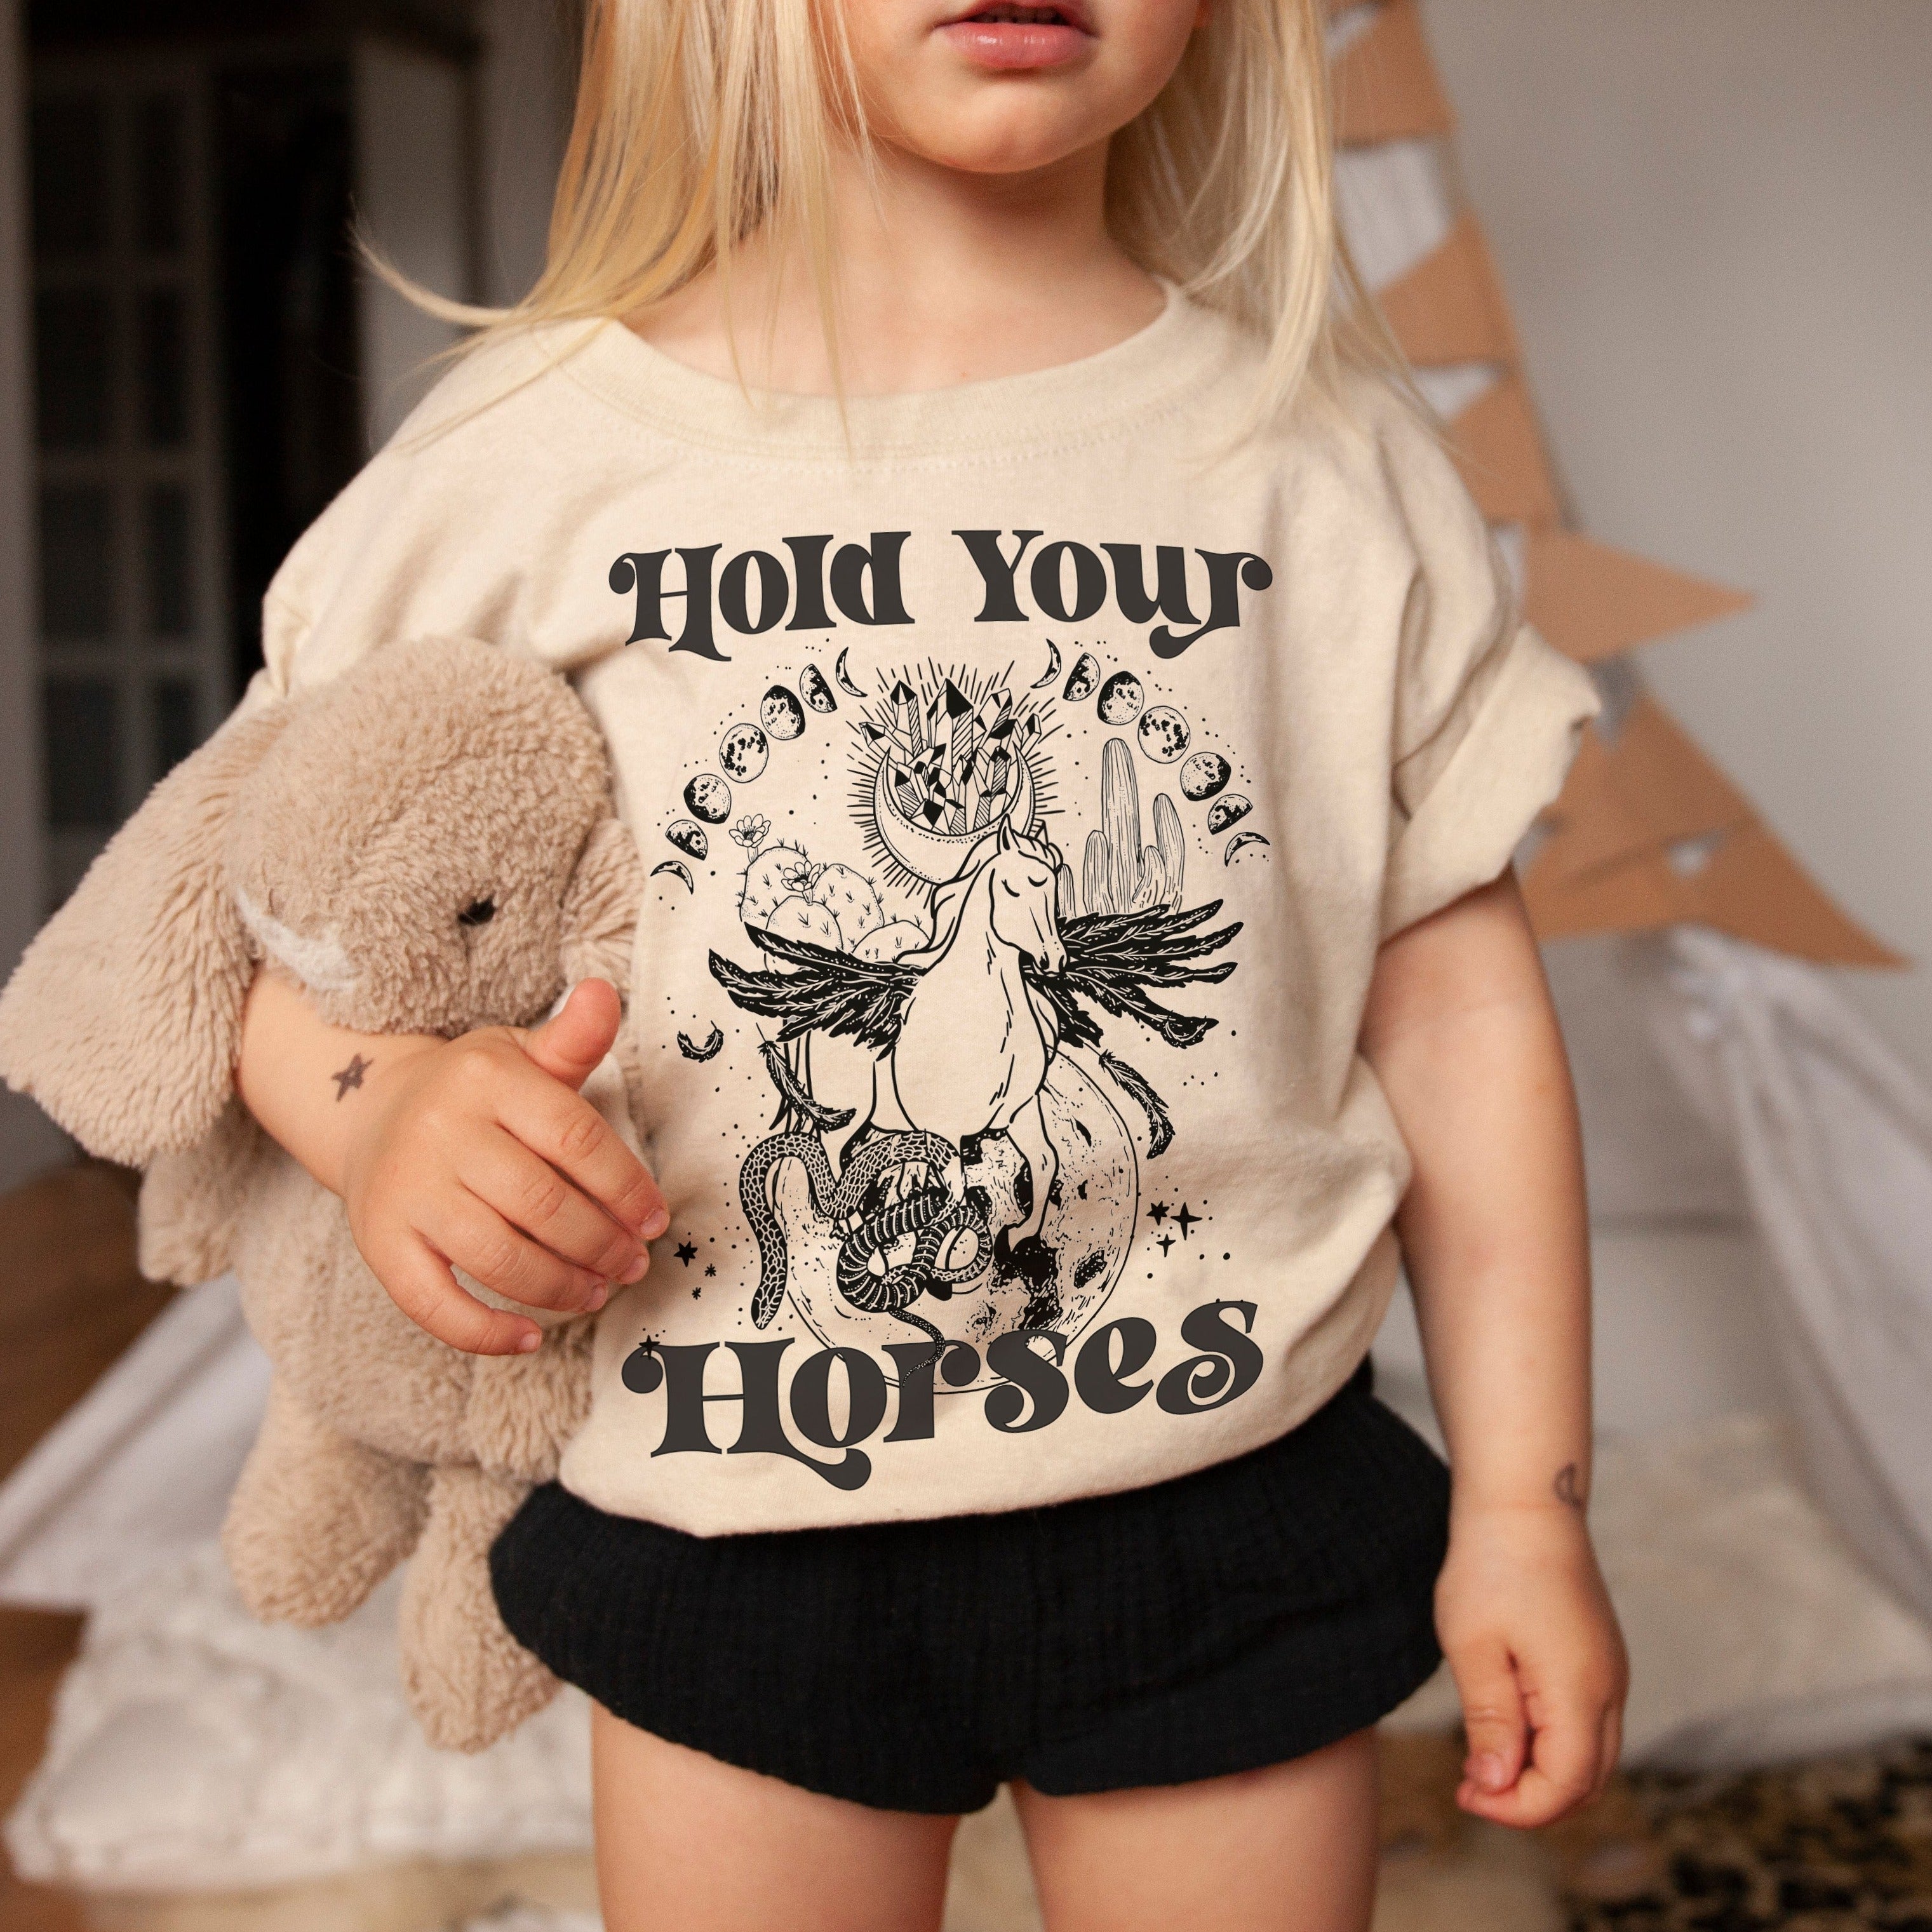 « HOLD YOUR HORSES » KID'S TEE